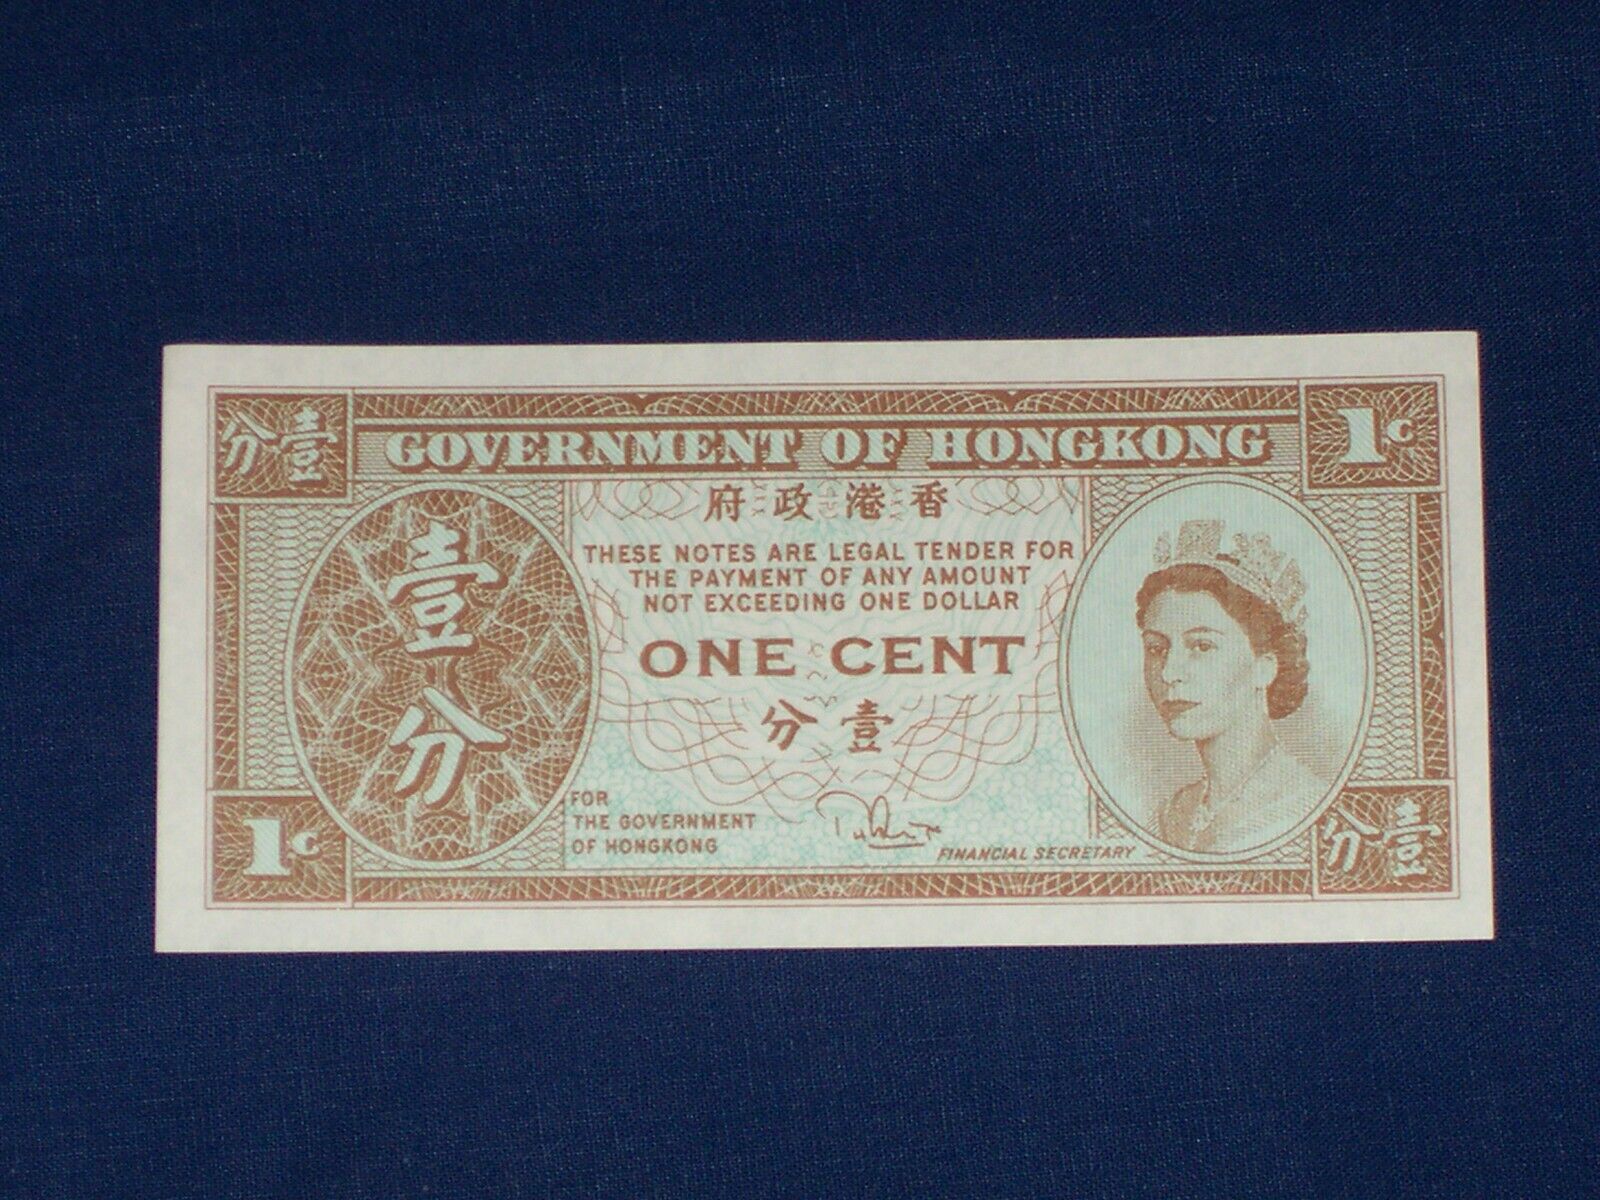 Qtr Bundle Be super welcome of 25 pcs Bank Notes from Hong 1 Cent Kong shop Ubcirculat